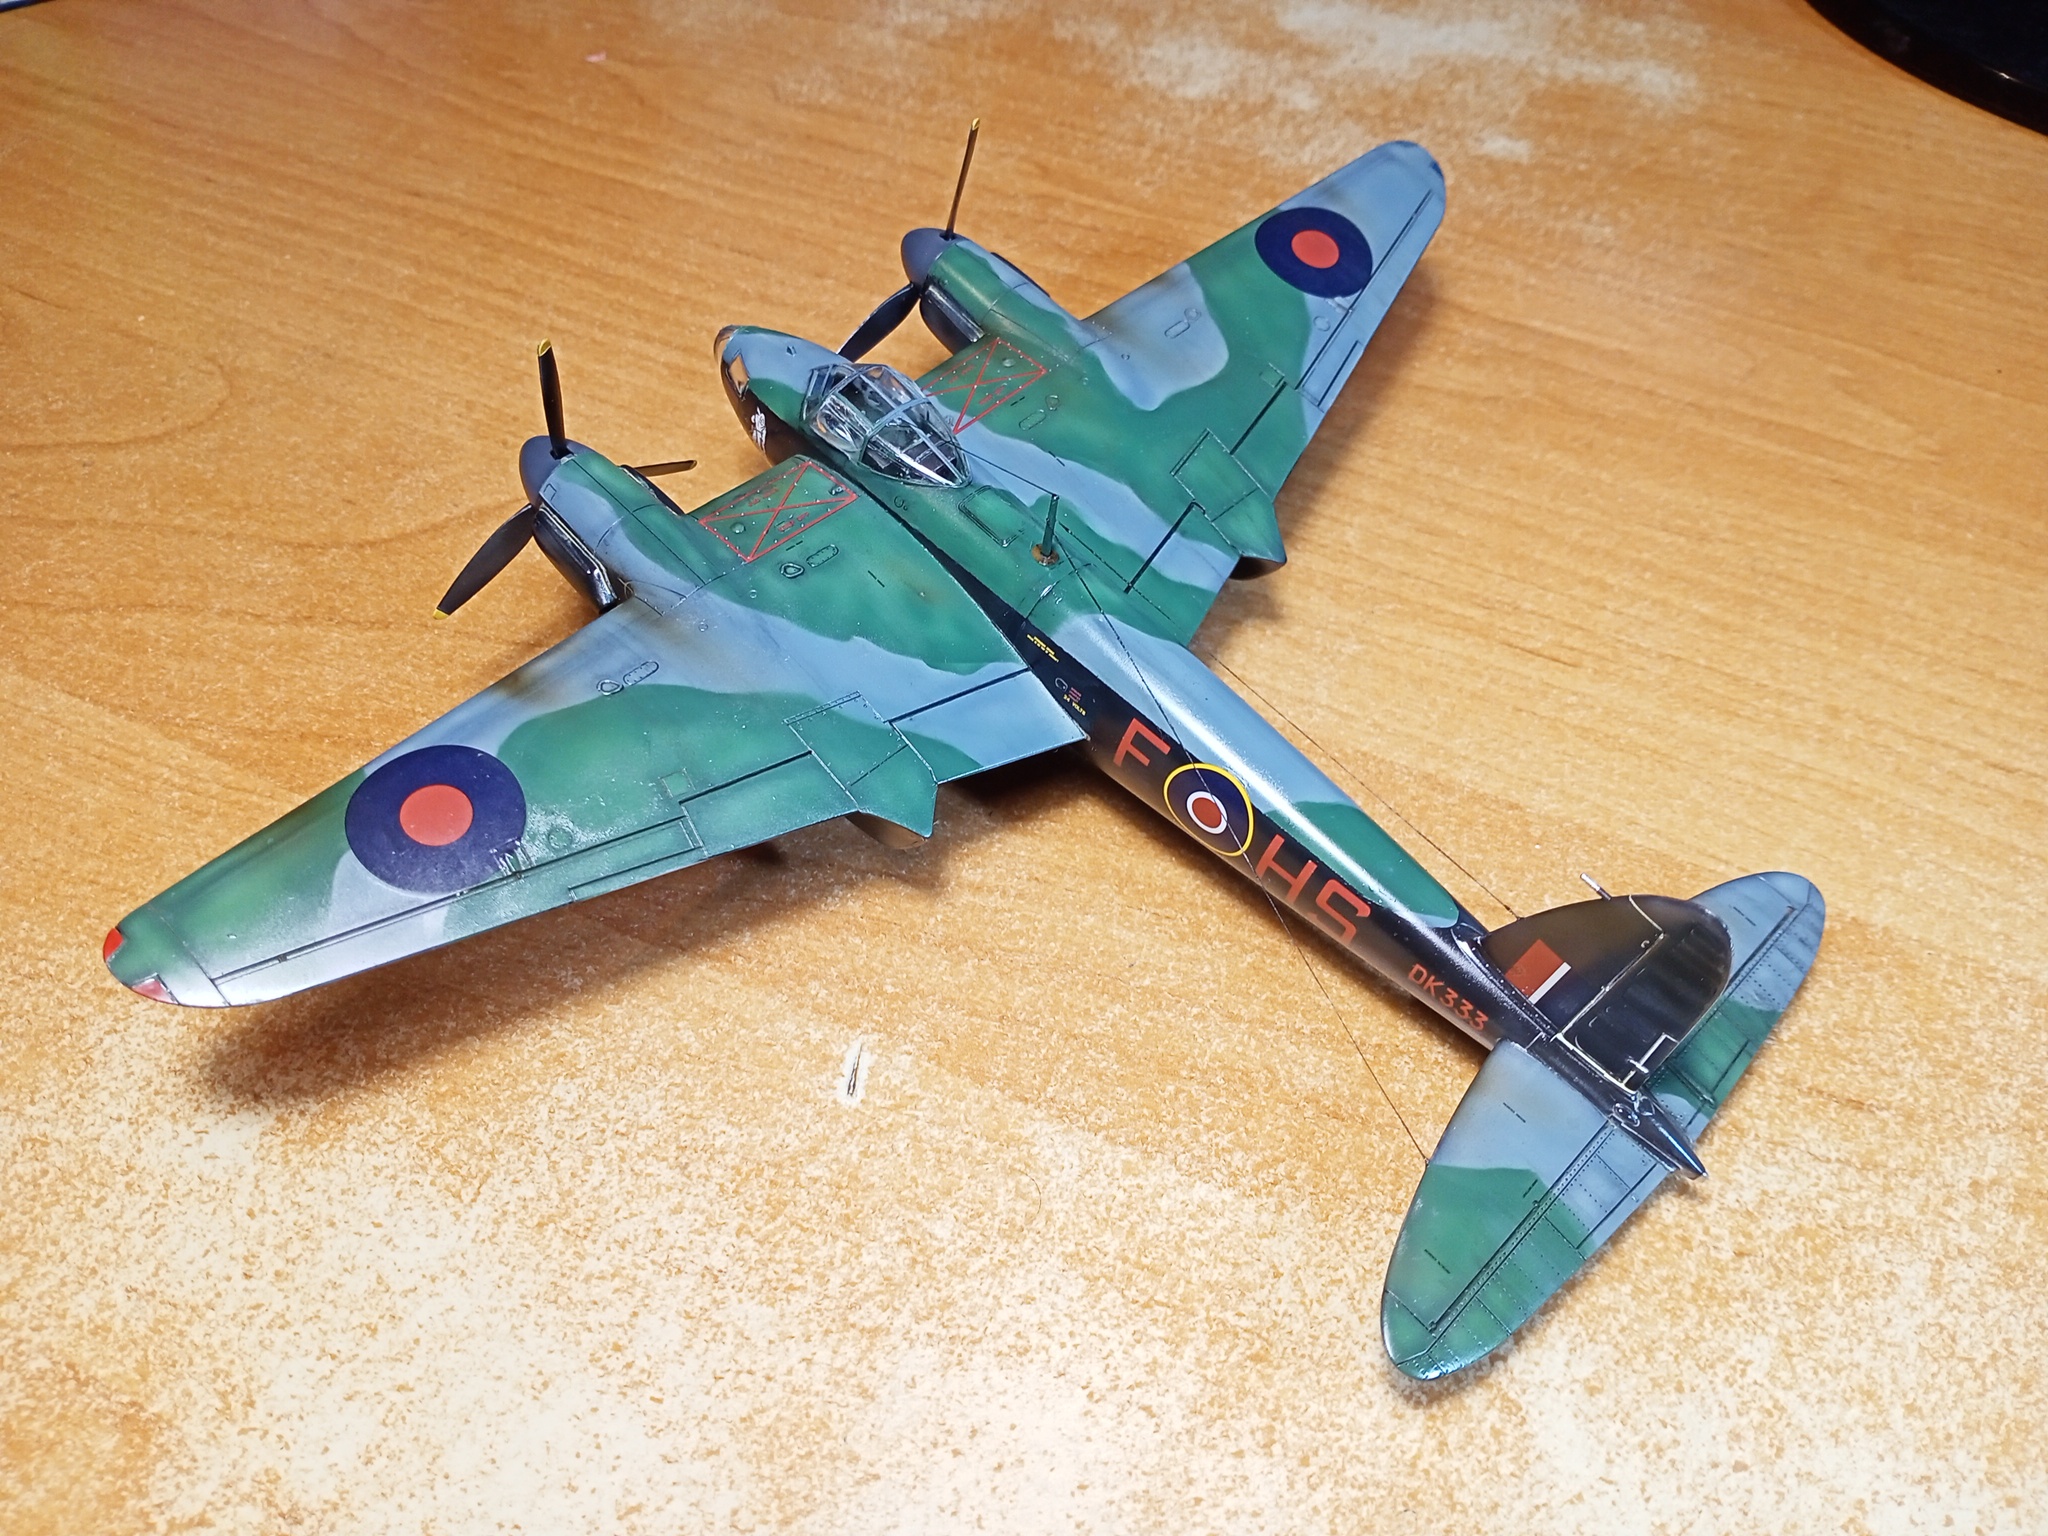 De Havilland D.H.98 Mosquito B Mk VI (1/72 Tamiya). Build Notes - My, Stand modeling, Modeling, Scale model, Hobby, Miniature, Painting miniatures, With your own hands, Needlework with process, Needlework, Aviation, The Second World War, Airplane, Prefabricated model, Assembly, Airbrushing, Overview, England, Great Britain, Bomber, Mosquito, Longpost